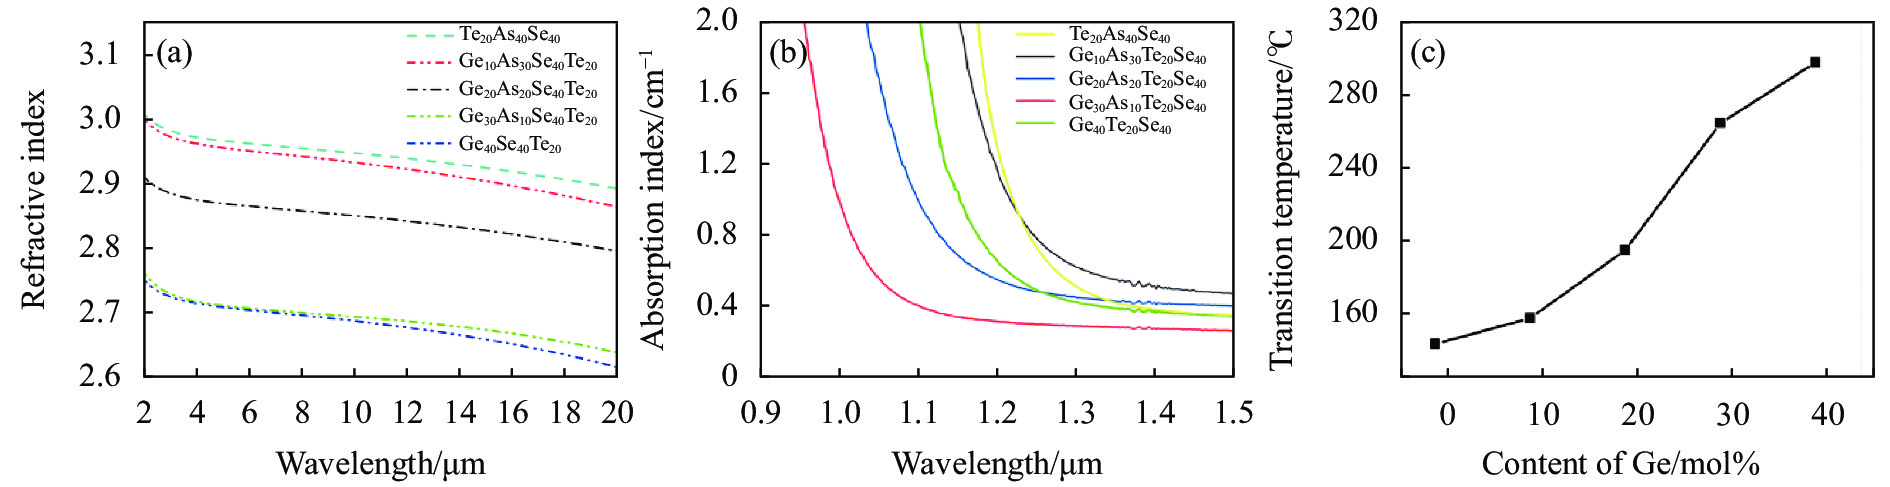 (a) Refractive index of the prepared chalcogenide glass(GexAs40−xSe40Te20,x=0, 10, 20, 30, 40) at 2-20 μm; (b) Absorption spectra of GexAs40−xSe40Te20 chalcogenide glass; (c) Tg of the glass as a function of Ge content